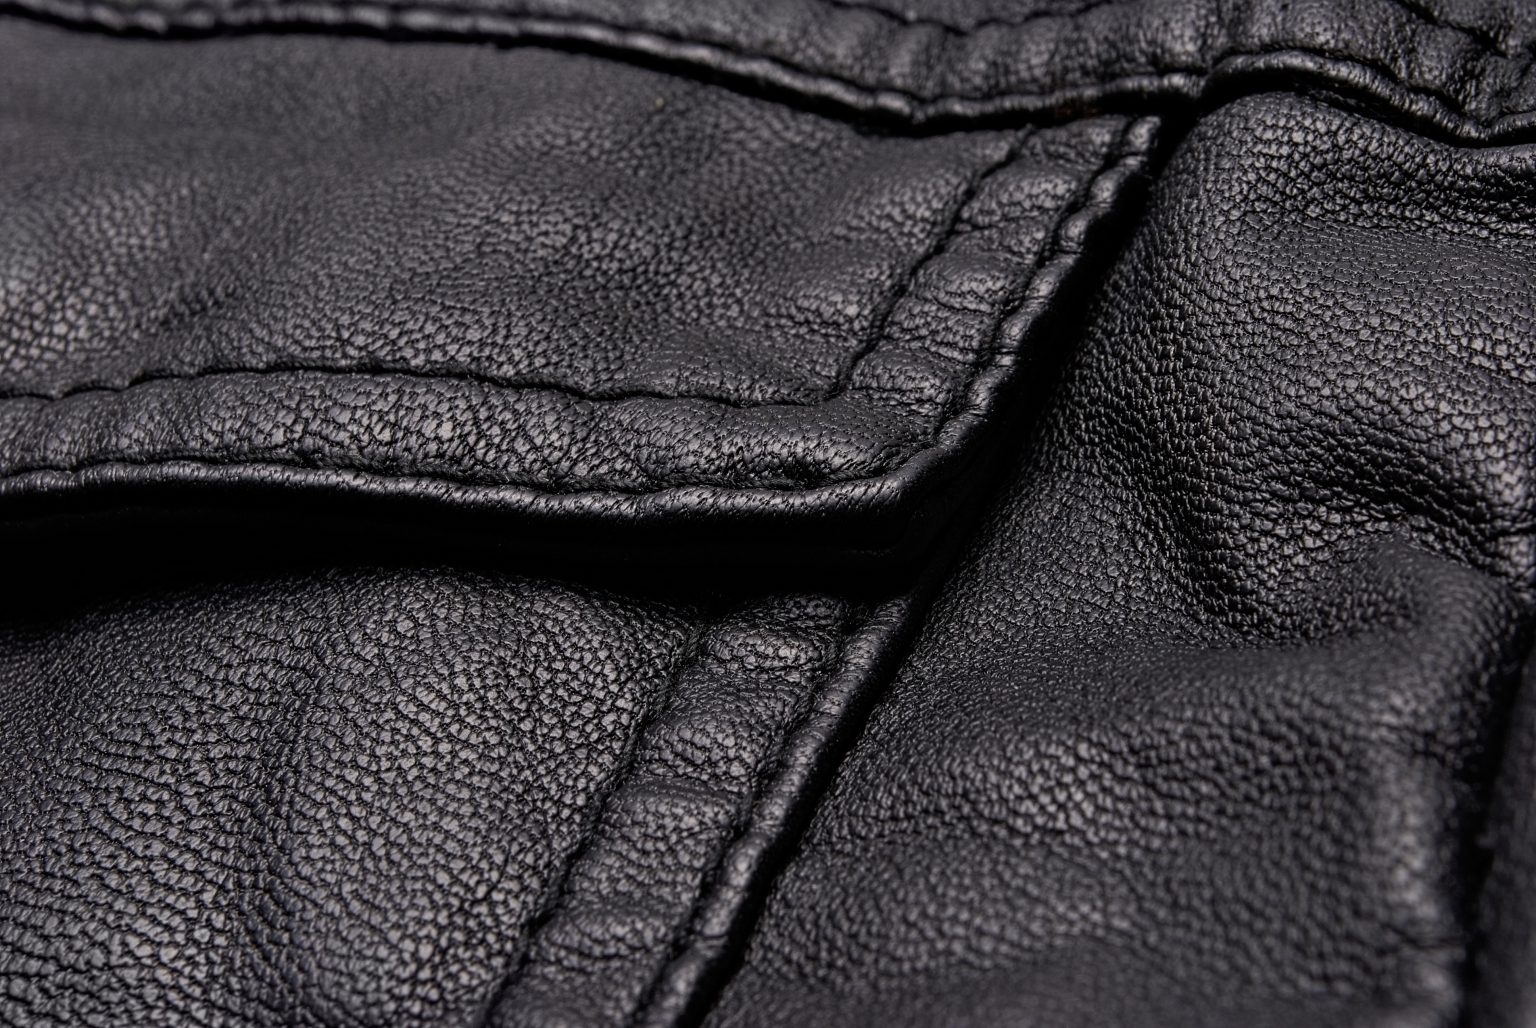 How to Repair Tears in Real & Faux Leather Jacket Easily